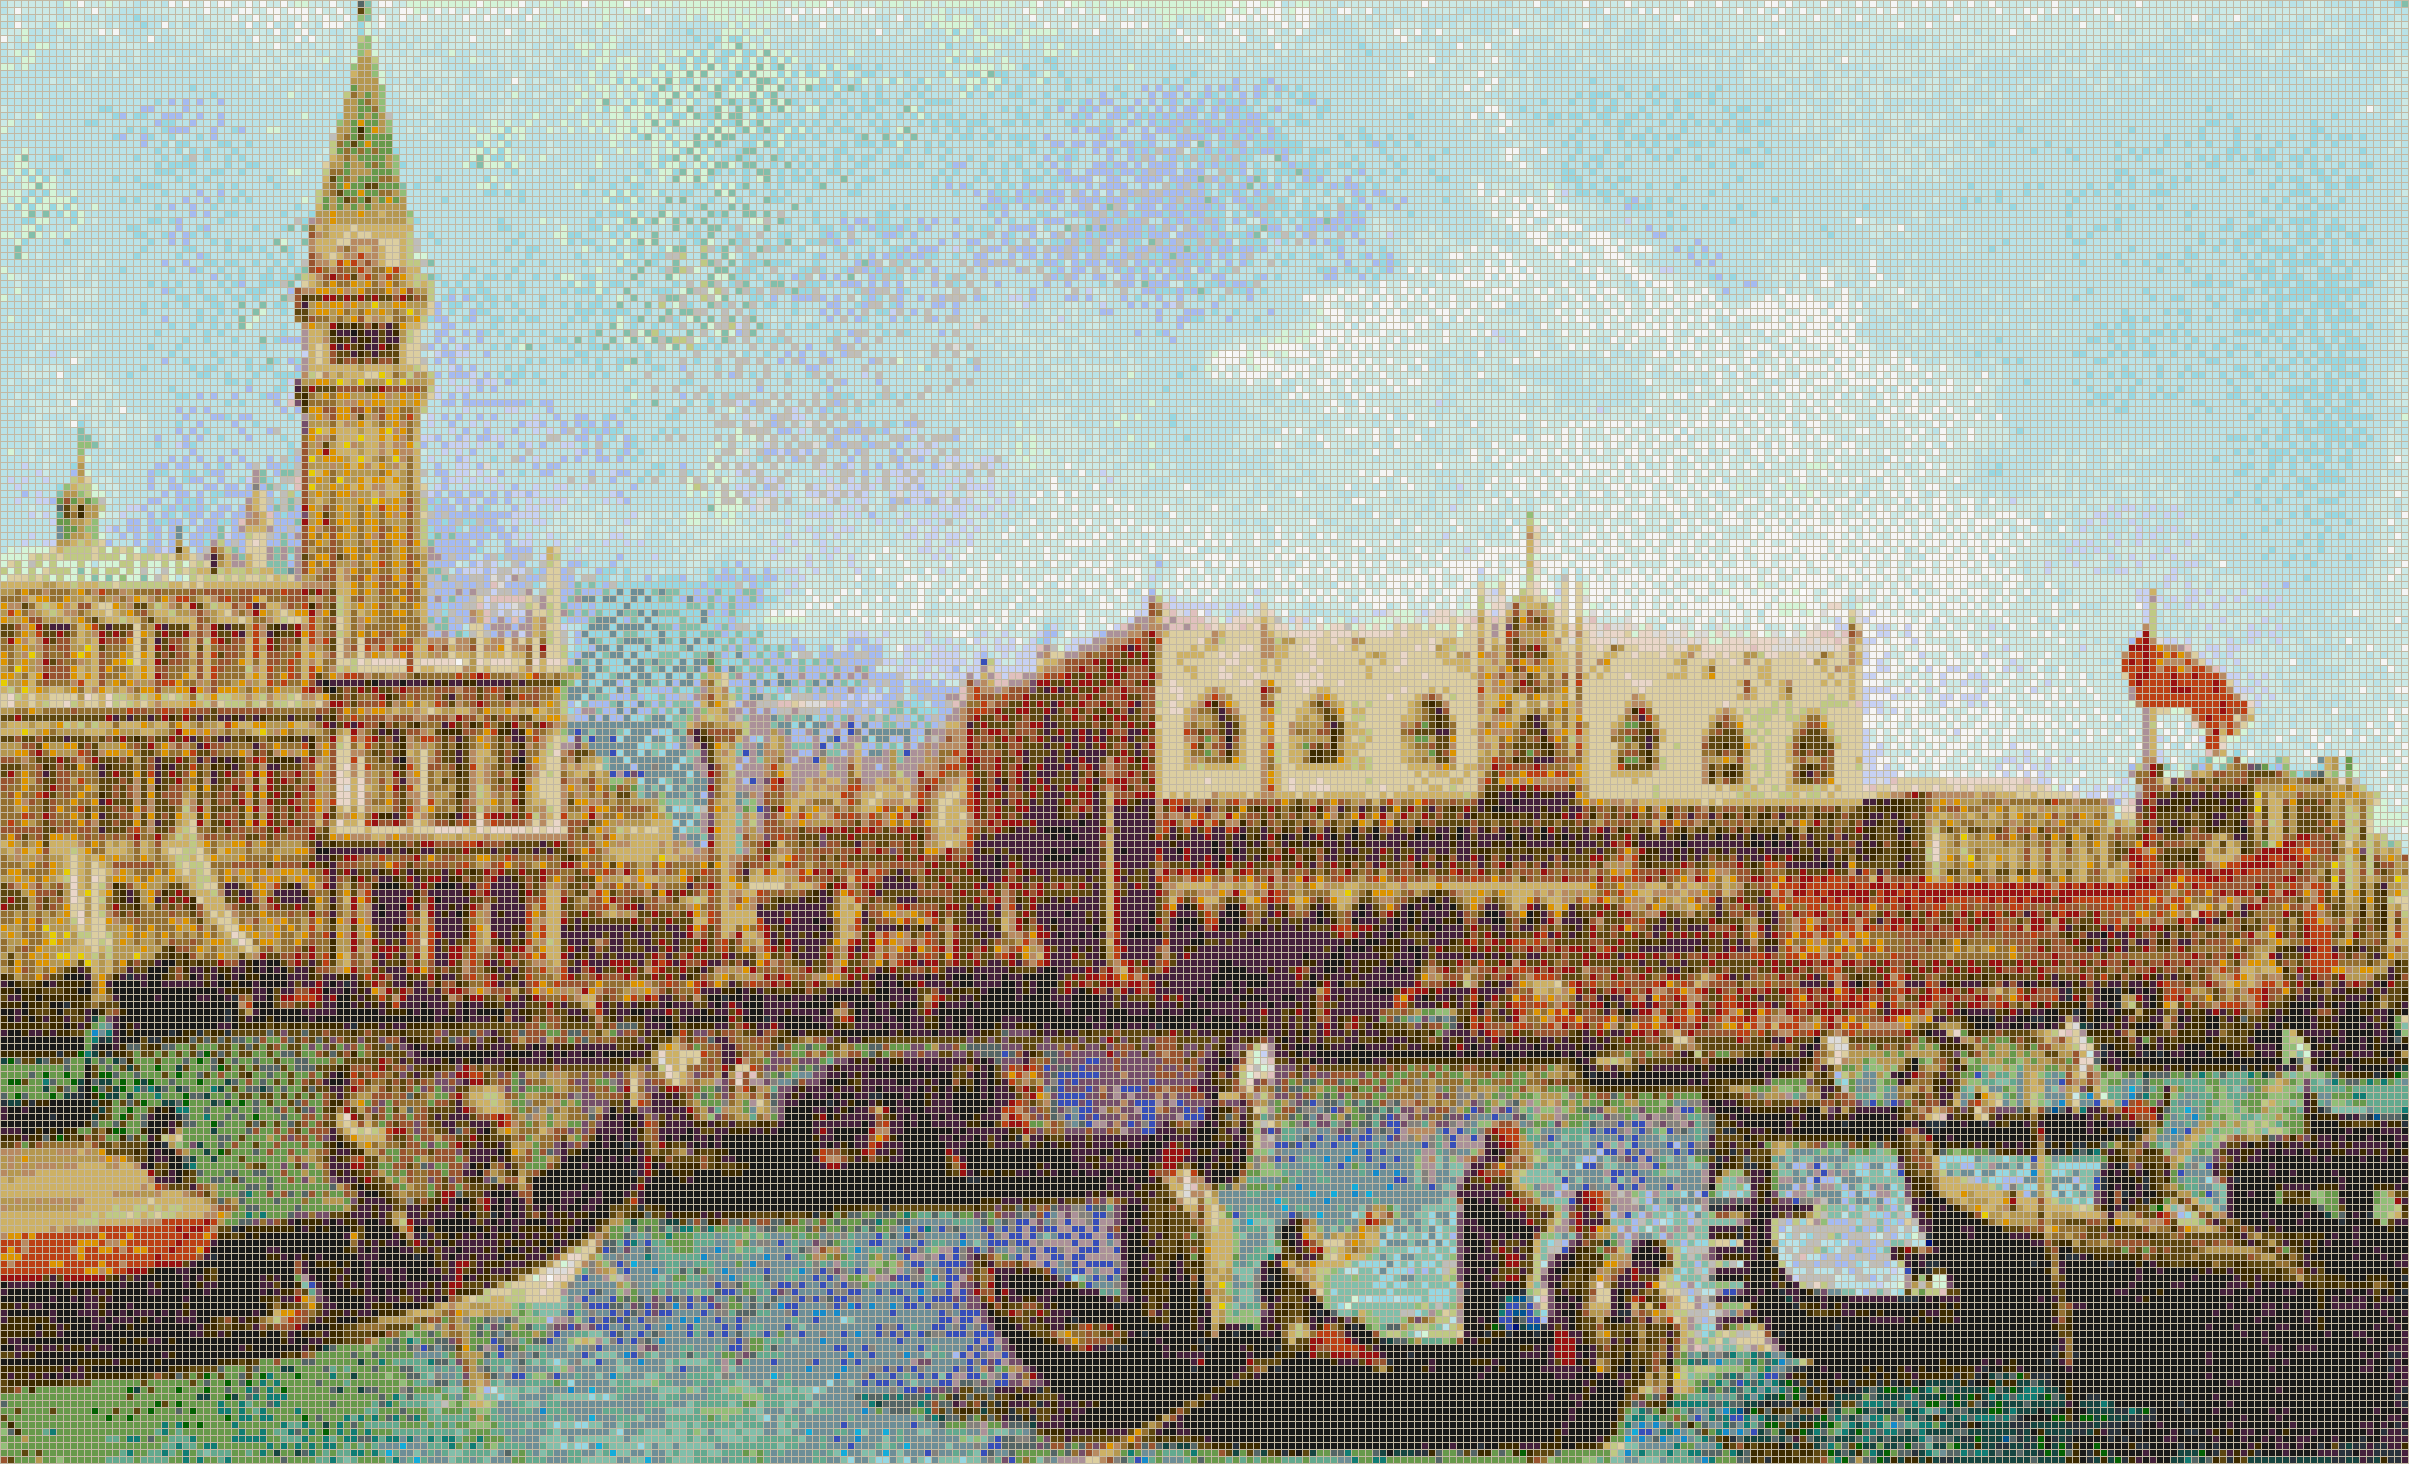 Bucentoro returns to the Molo, Venice (Canaletto) - Mosaic Tile Picture Art